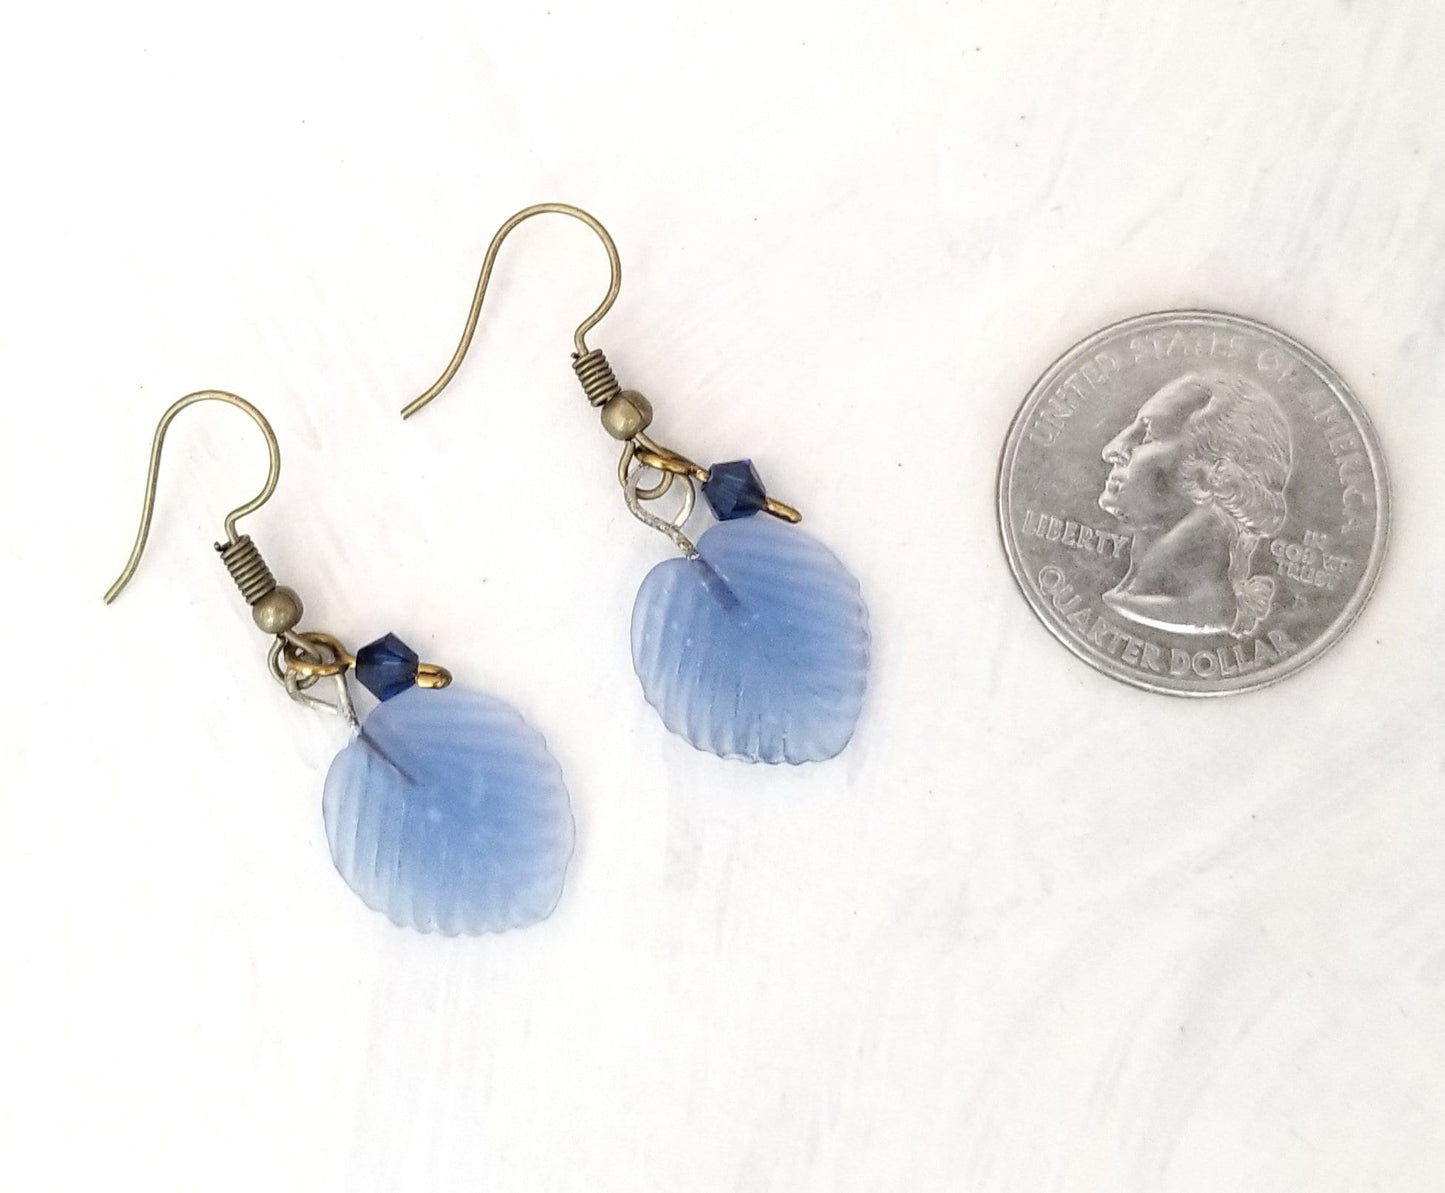 Medium Glass Leaf Earrings in Frosted Blue, Wedding, Bridesmaid, Art Nouveau, Renaissance, Belle Epoque, Forest, Choice of Closure Types